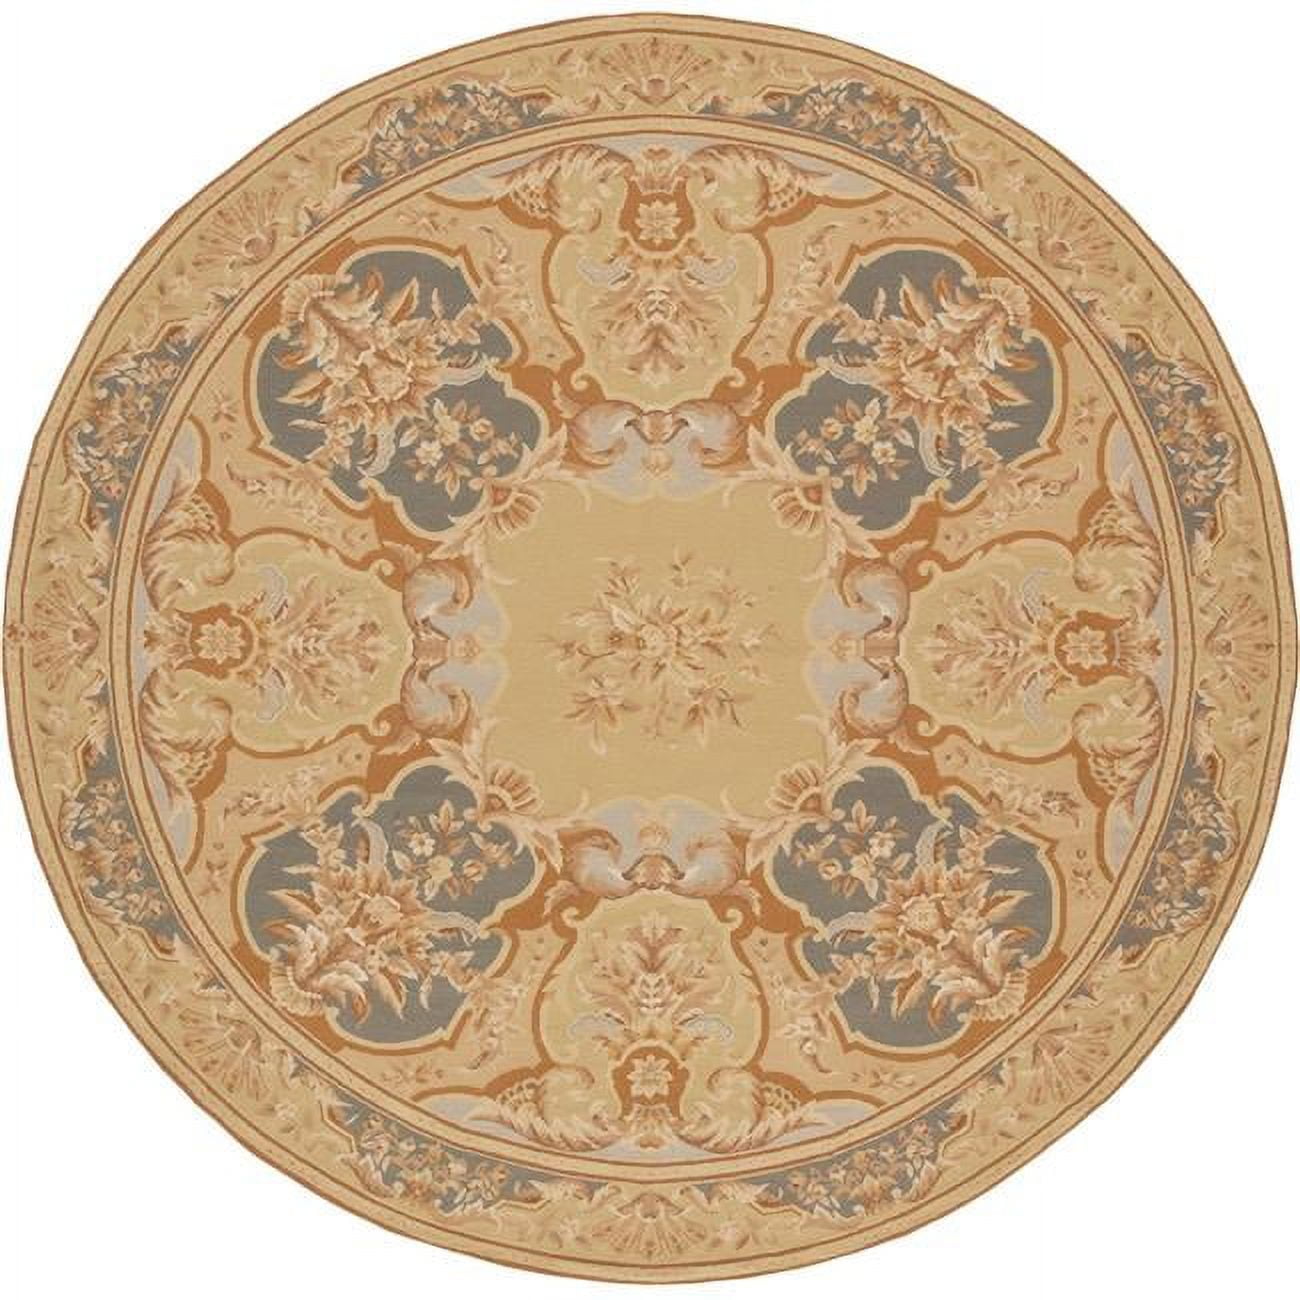 Planon 14 x 14 ft. Etien Flat Woven Round Area Rug - Ivory & Blue